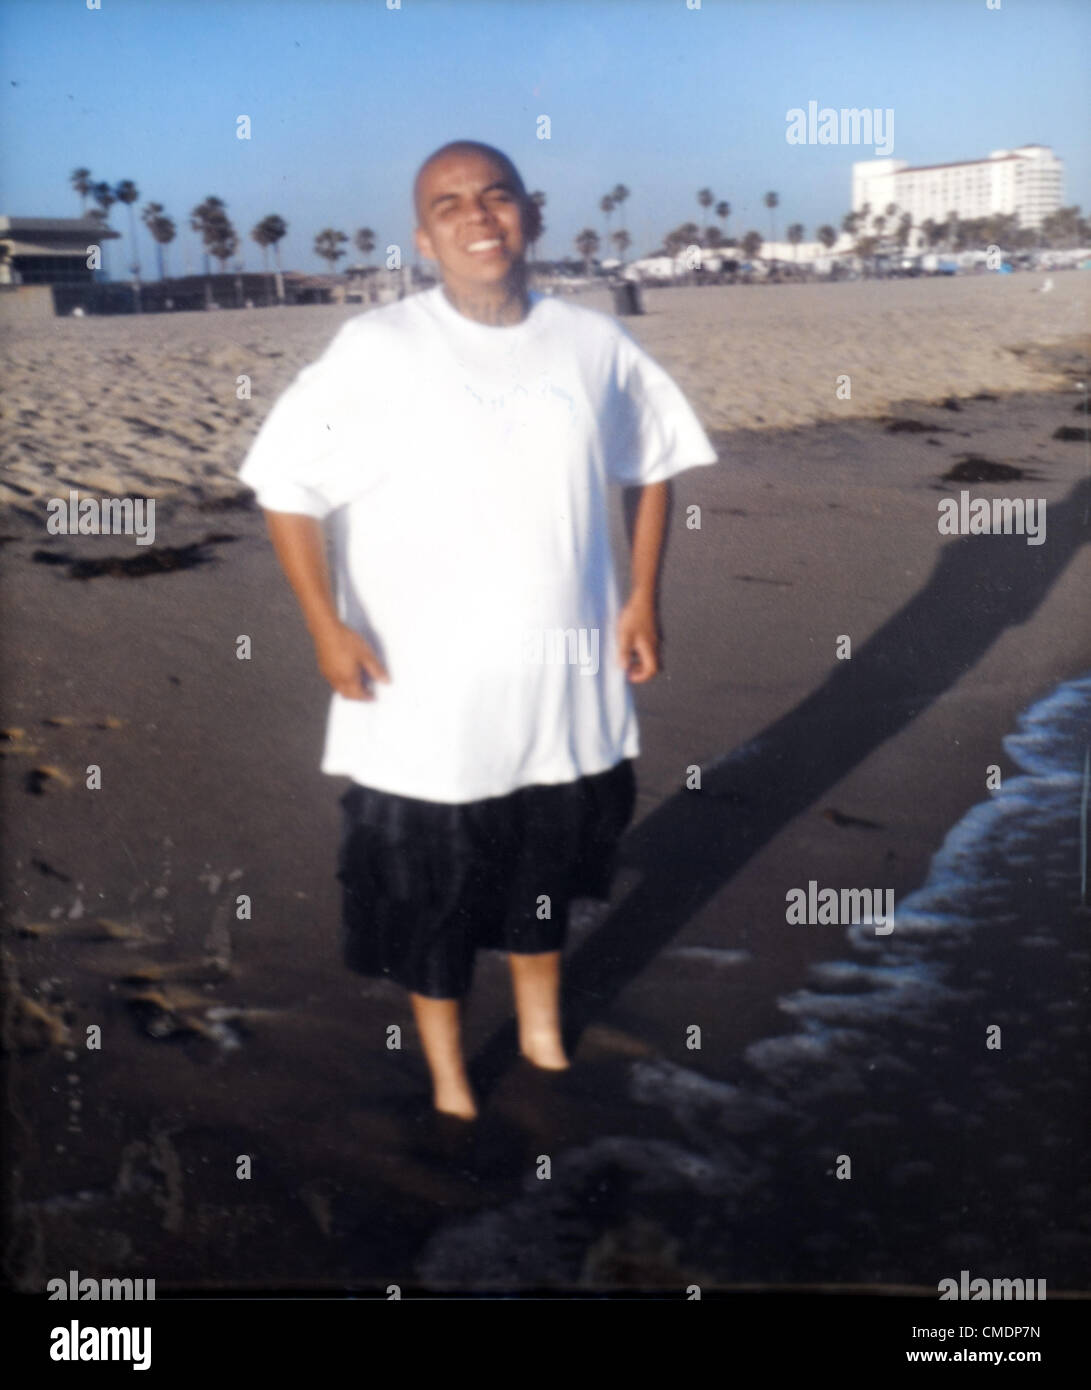 July 25, 2012 - Anaheim, California, U.S. - A photo of Anaheim resident, JOEL ACEVEDO, 23, was on display at a memorial made by friends and family on South Palm Street. In the photo Acevedo was 21 years old. Anaheim resident Joel Acevedo, 23, was shot to death by Anaheim Police after he led them on a short chase, crashed in the stolen car and shot at police at around 11 p.m. on Sunday, July 22, 2012. (Credit Image: © David Bro/ZUMAPRESS.com) Stock Photo